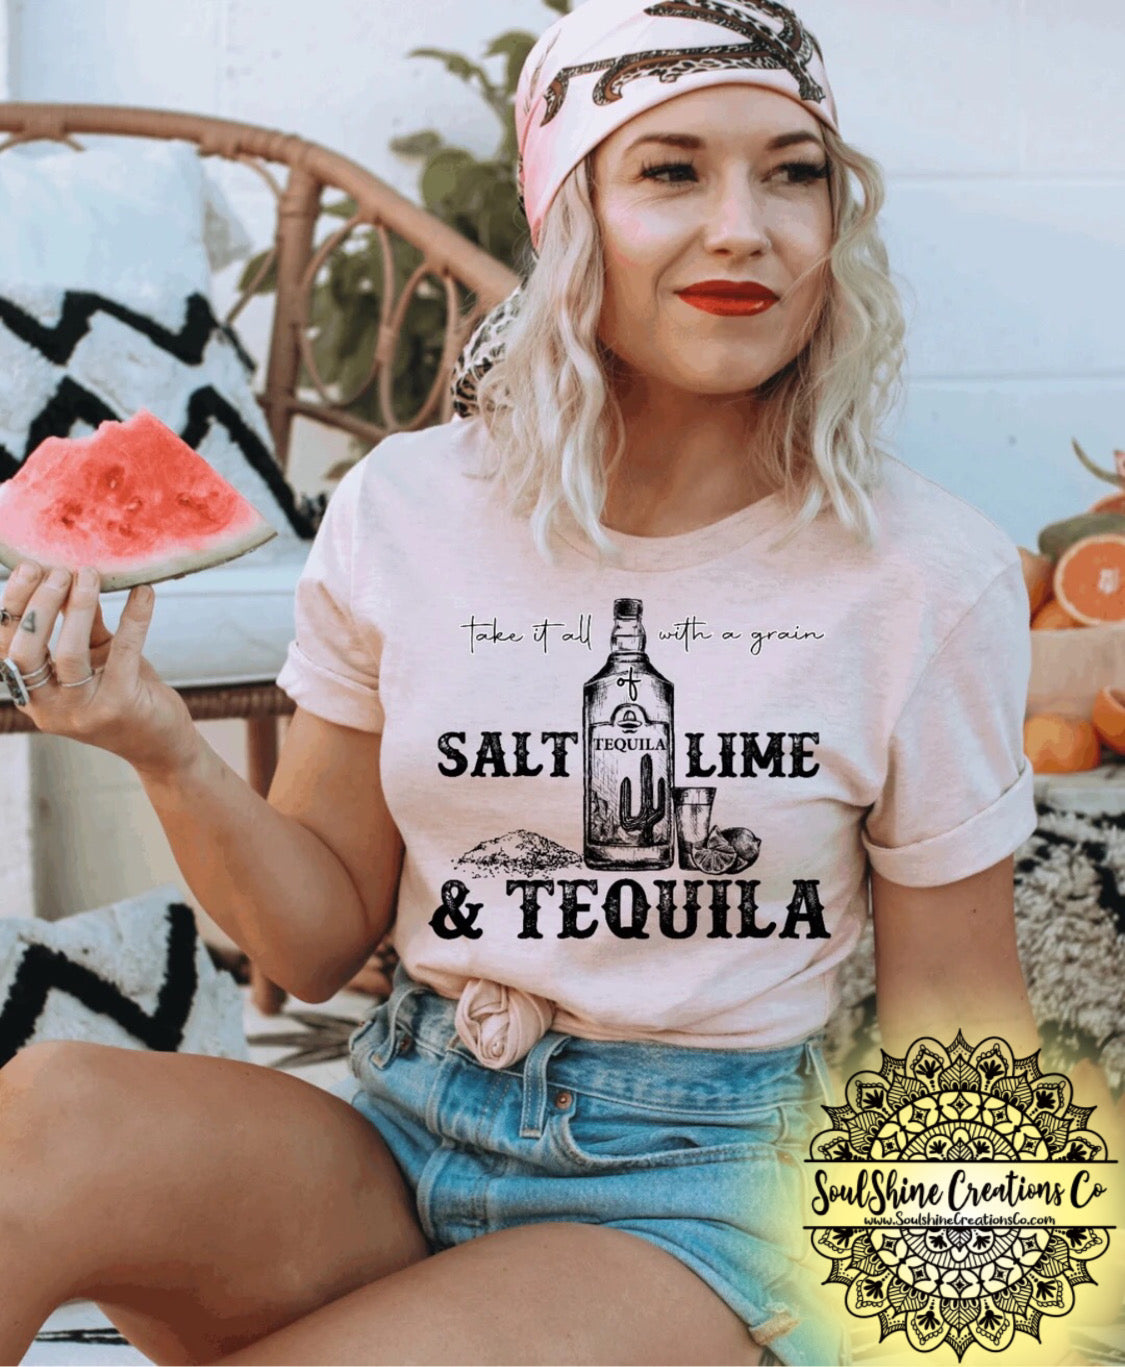 Take it all with a grain of salt lime & tequila shirt